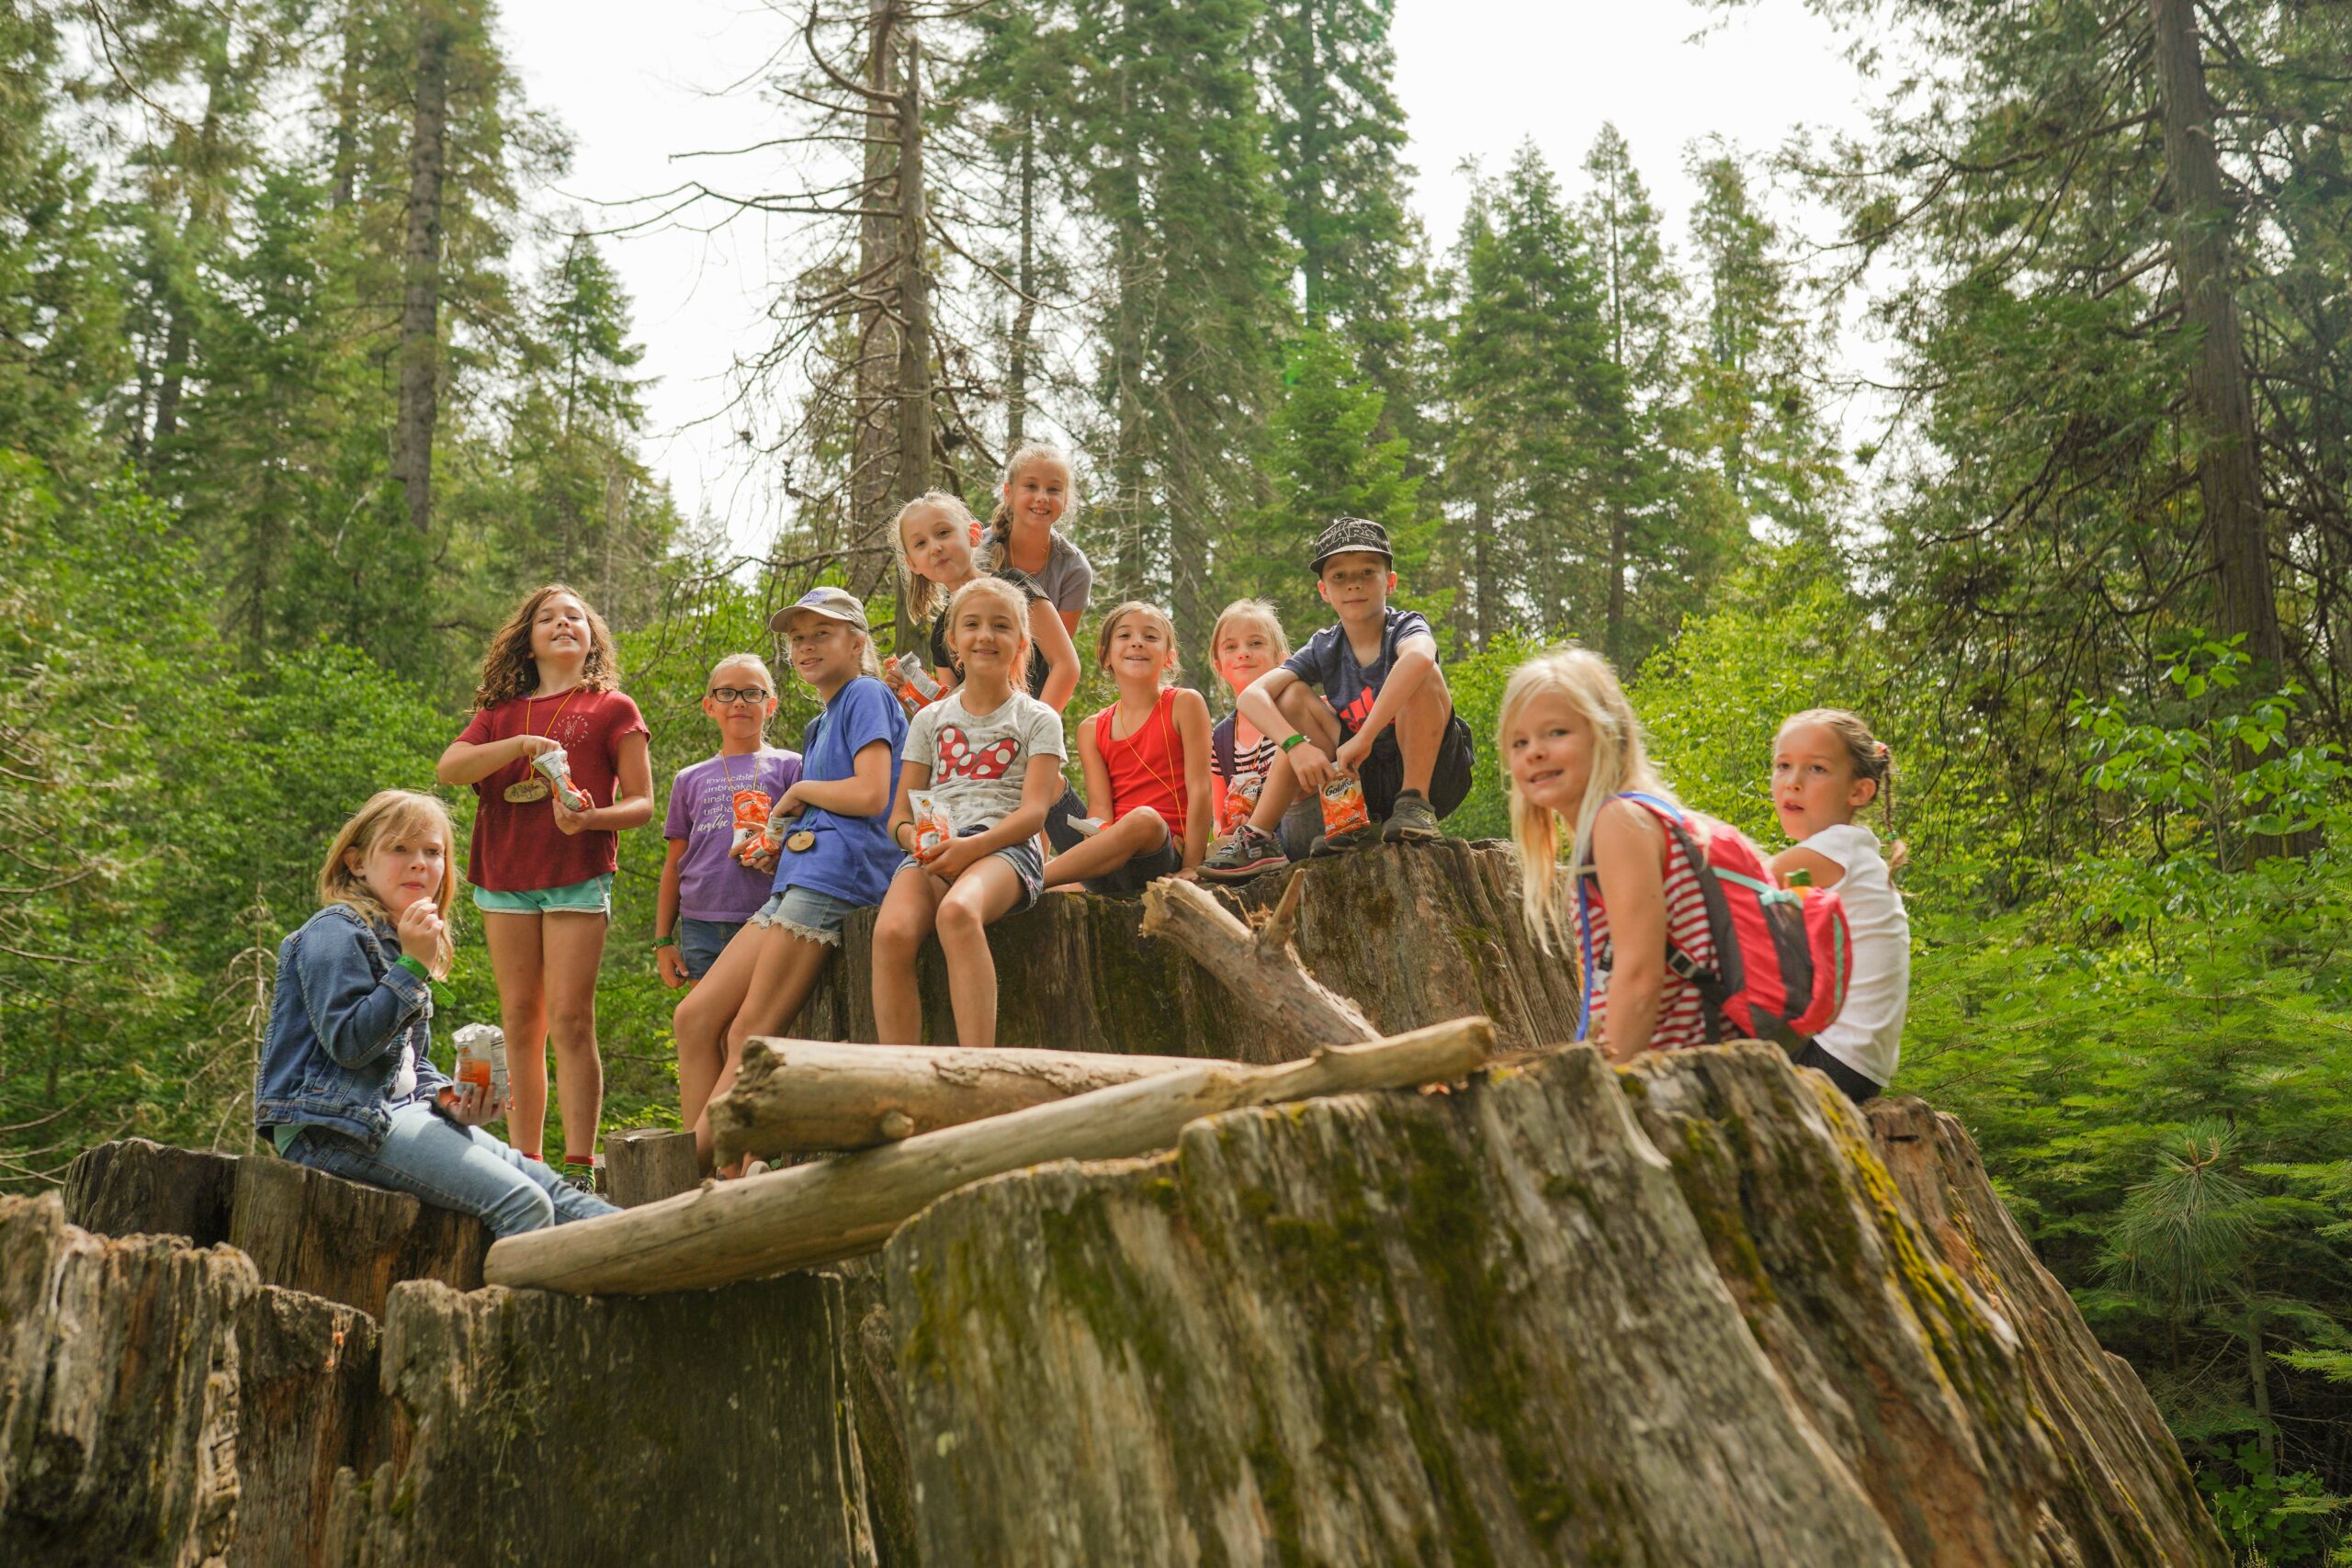 Group of joyful children posing on a large tree stump in a lush forest.